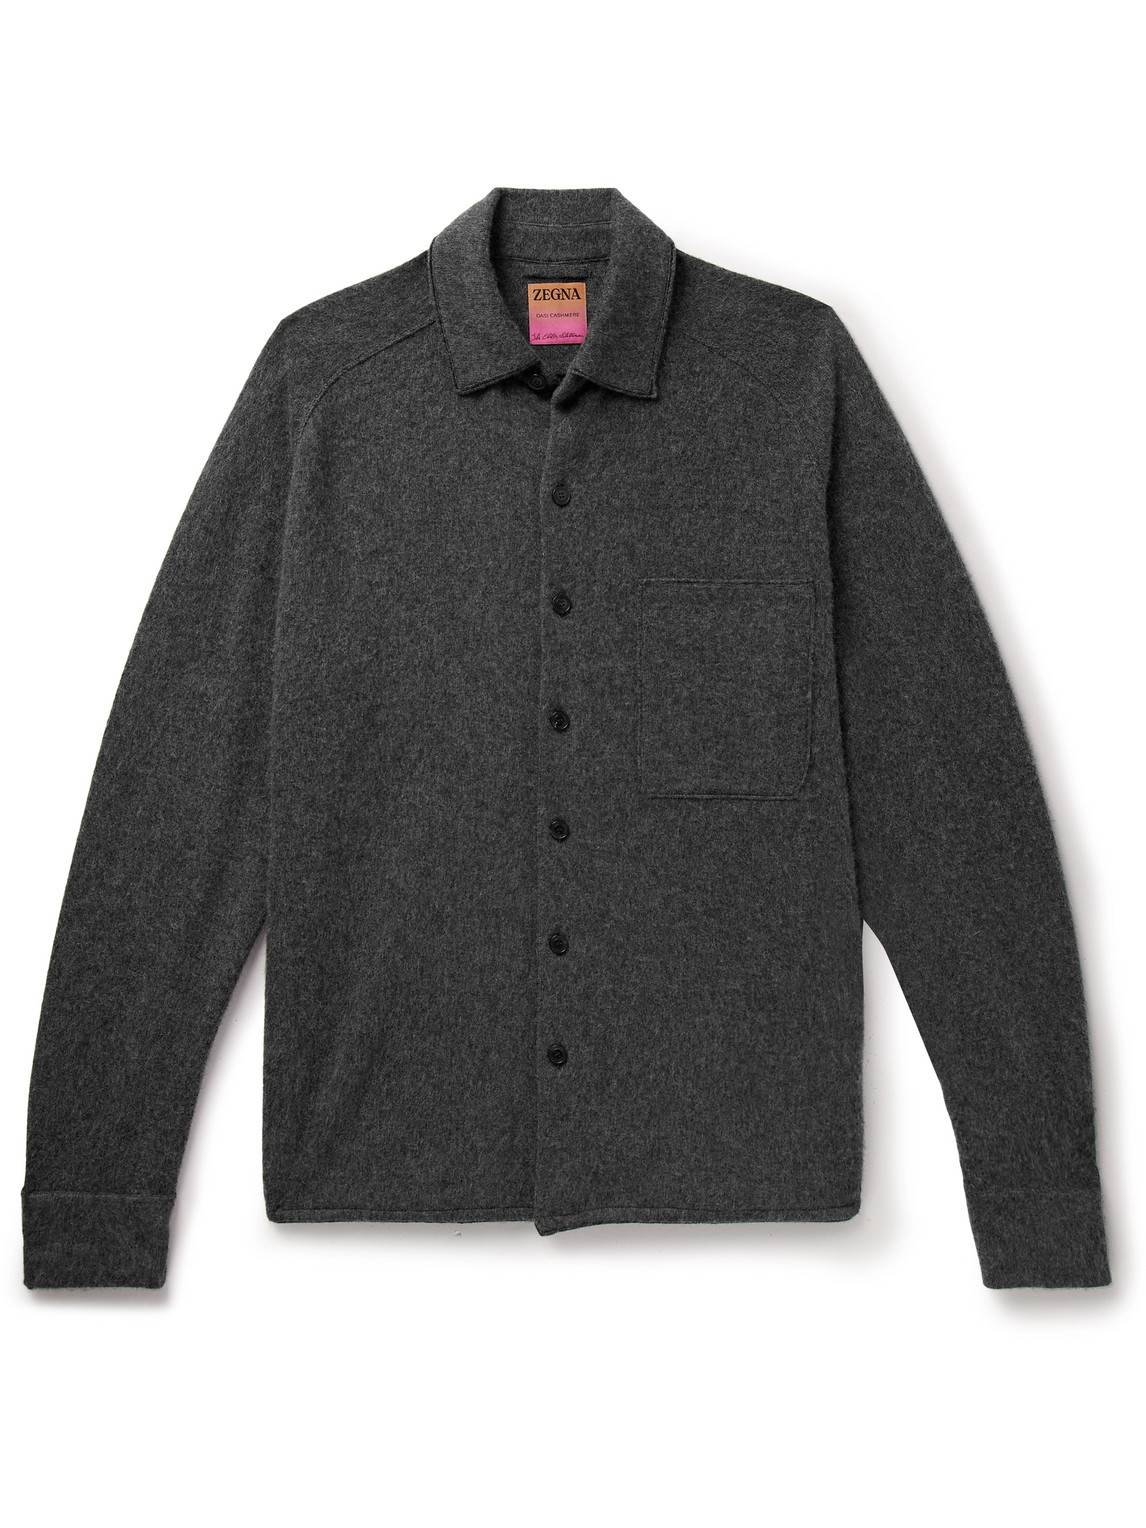 Zegna X The Elder Statesman Brushed Oasi Cashmere Shirt In Gray